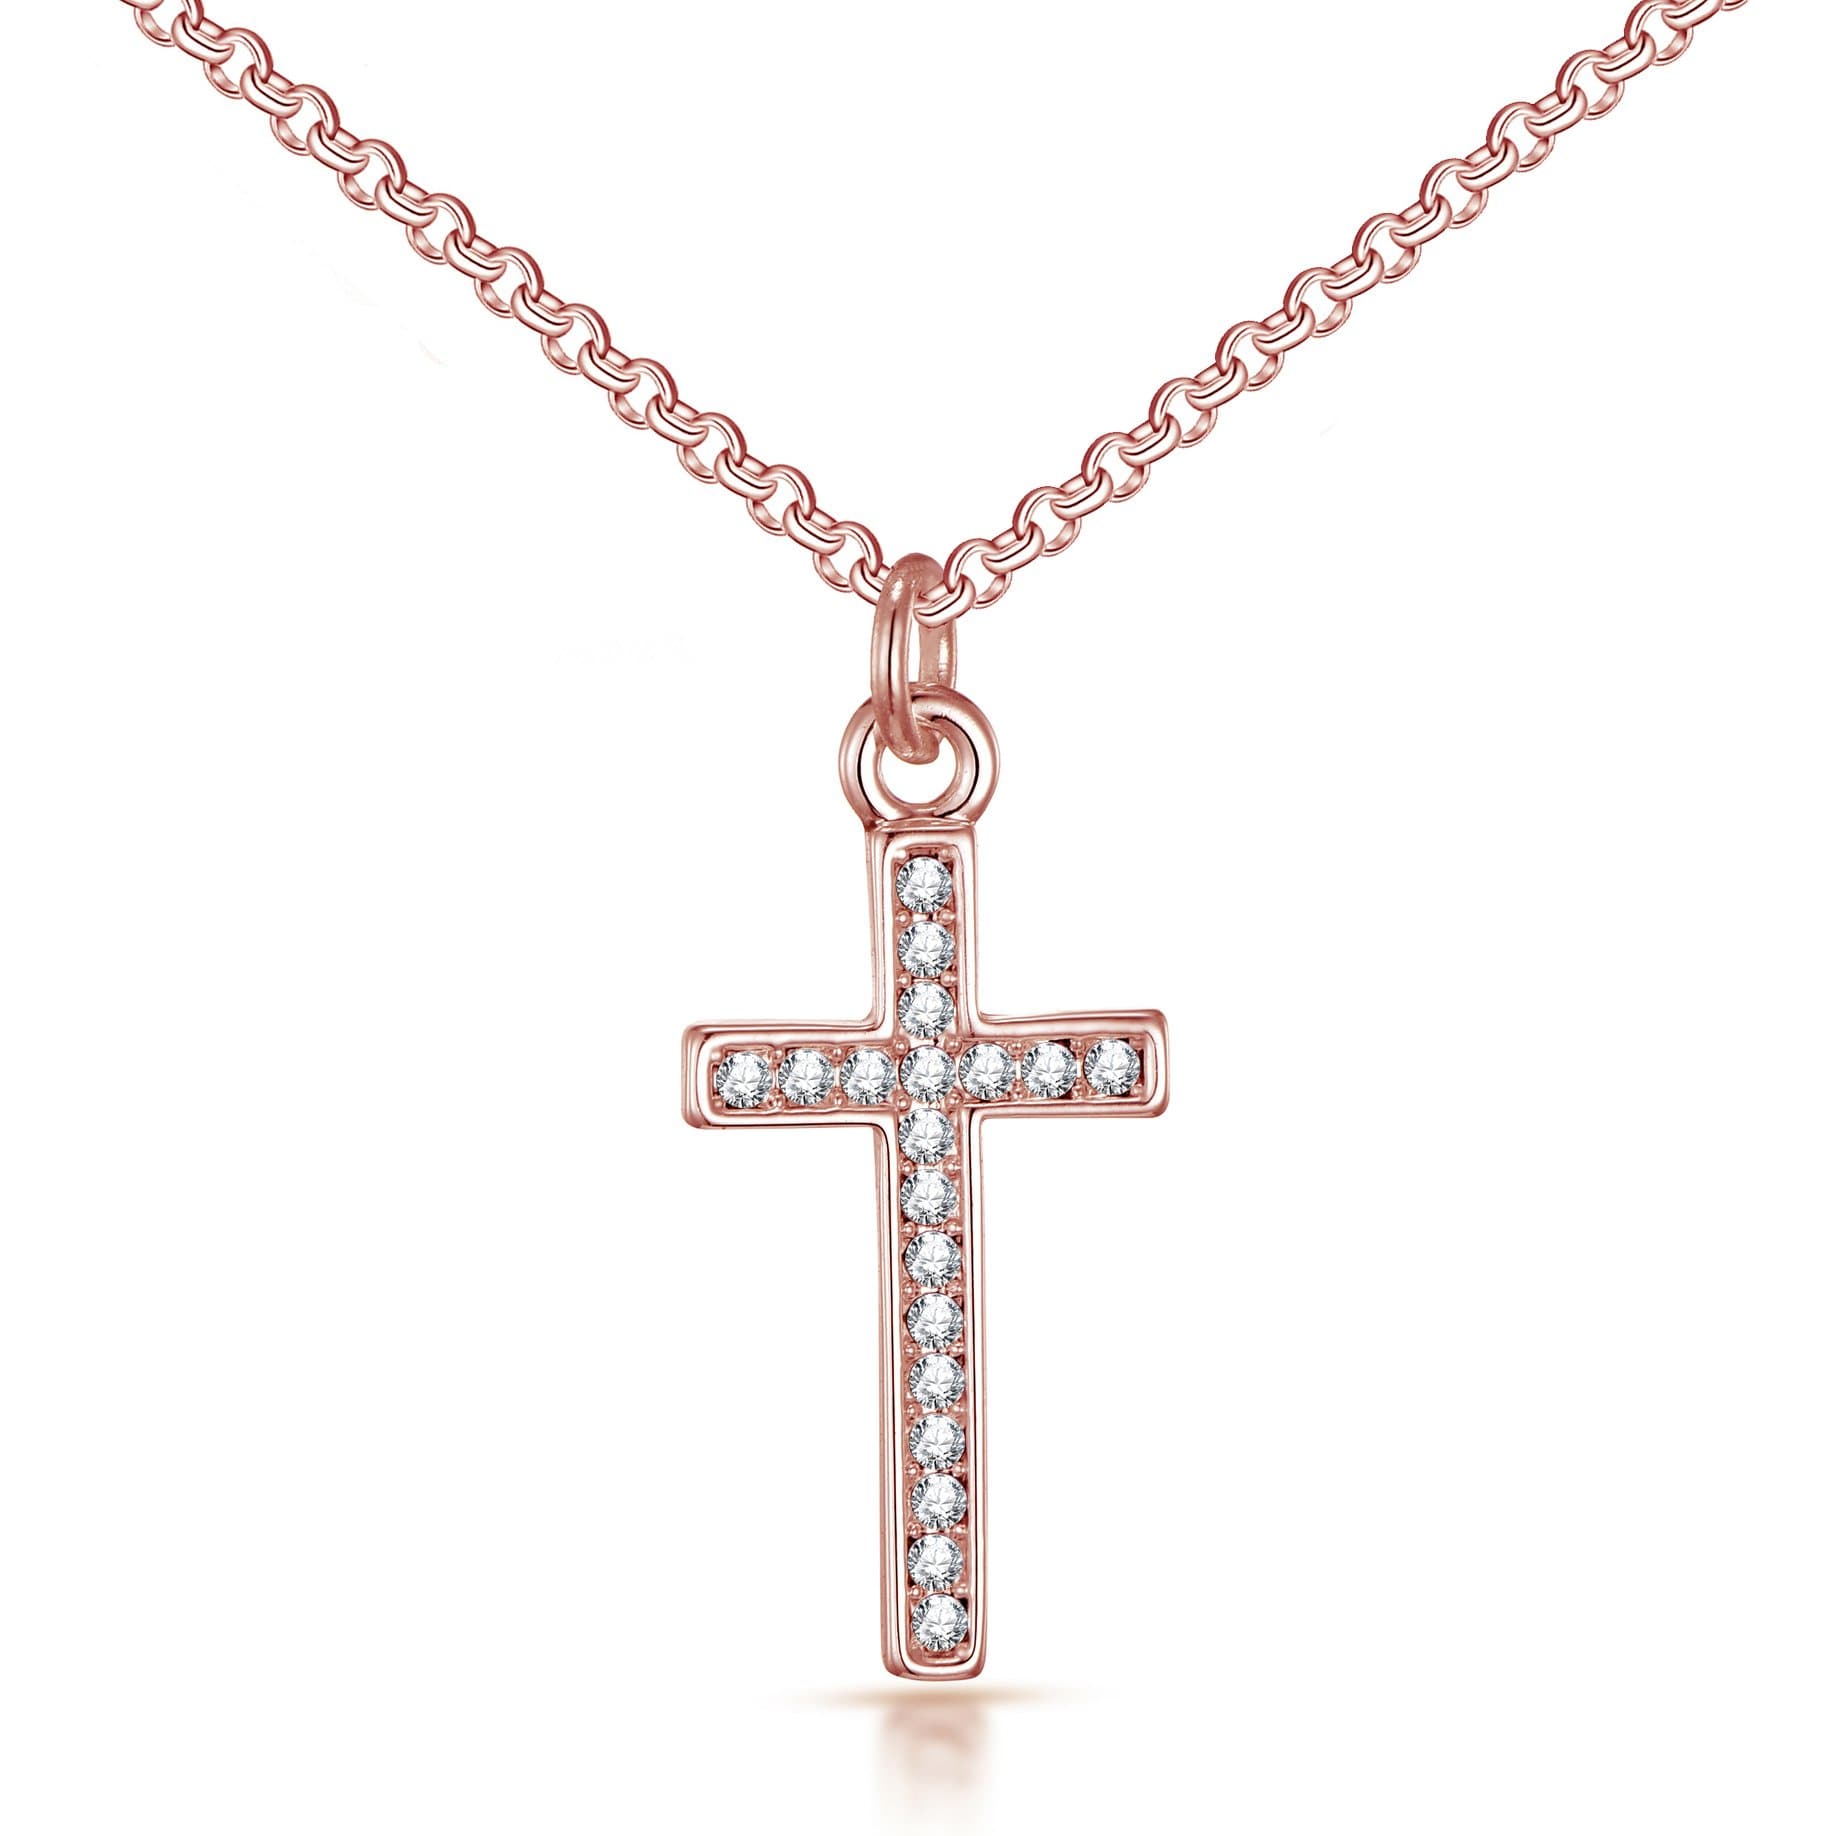 Rose Gold Plated Pave Crystal Cross Necklace Created with Zircondia® Crystals by Philip Jones Jewellery